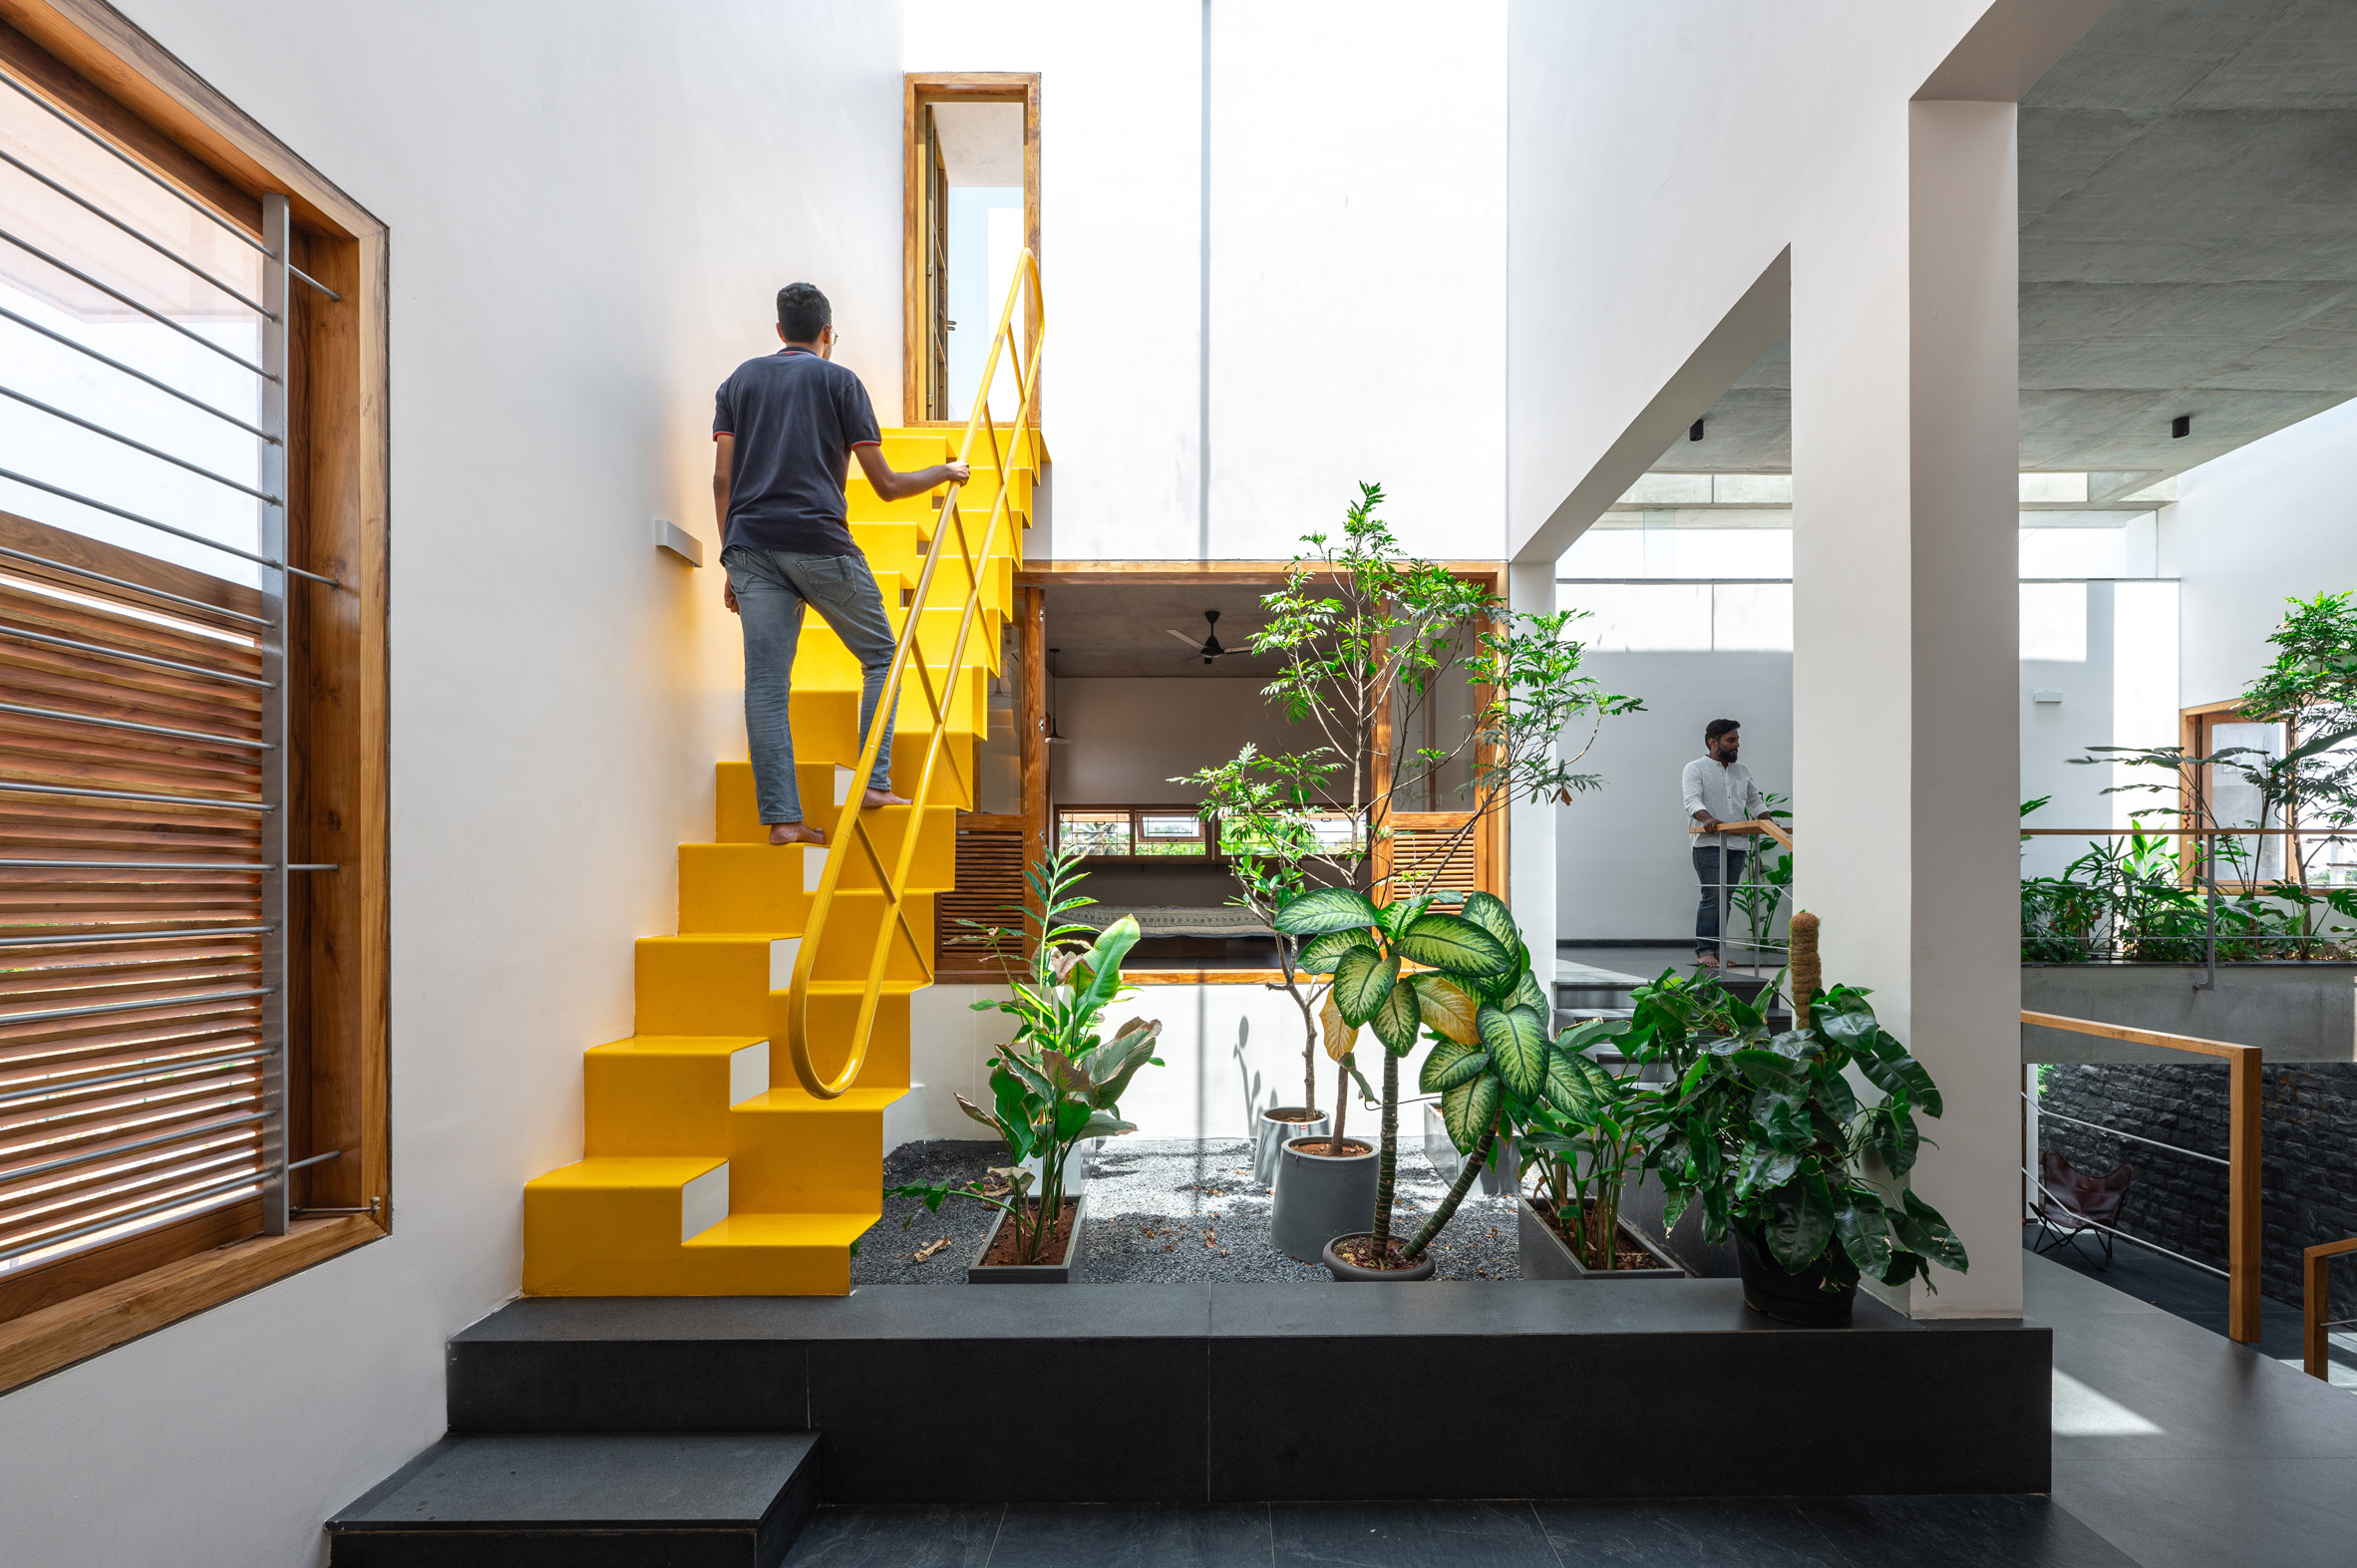 Internal courtyard with yellow staircase